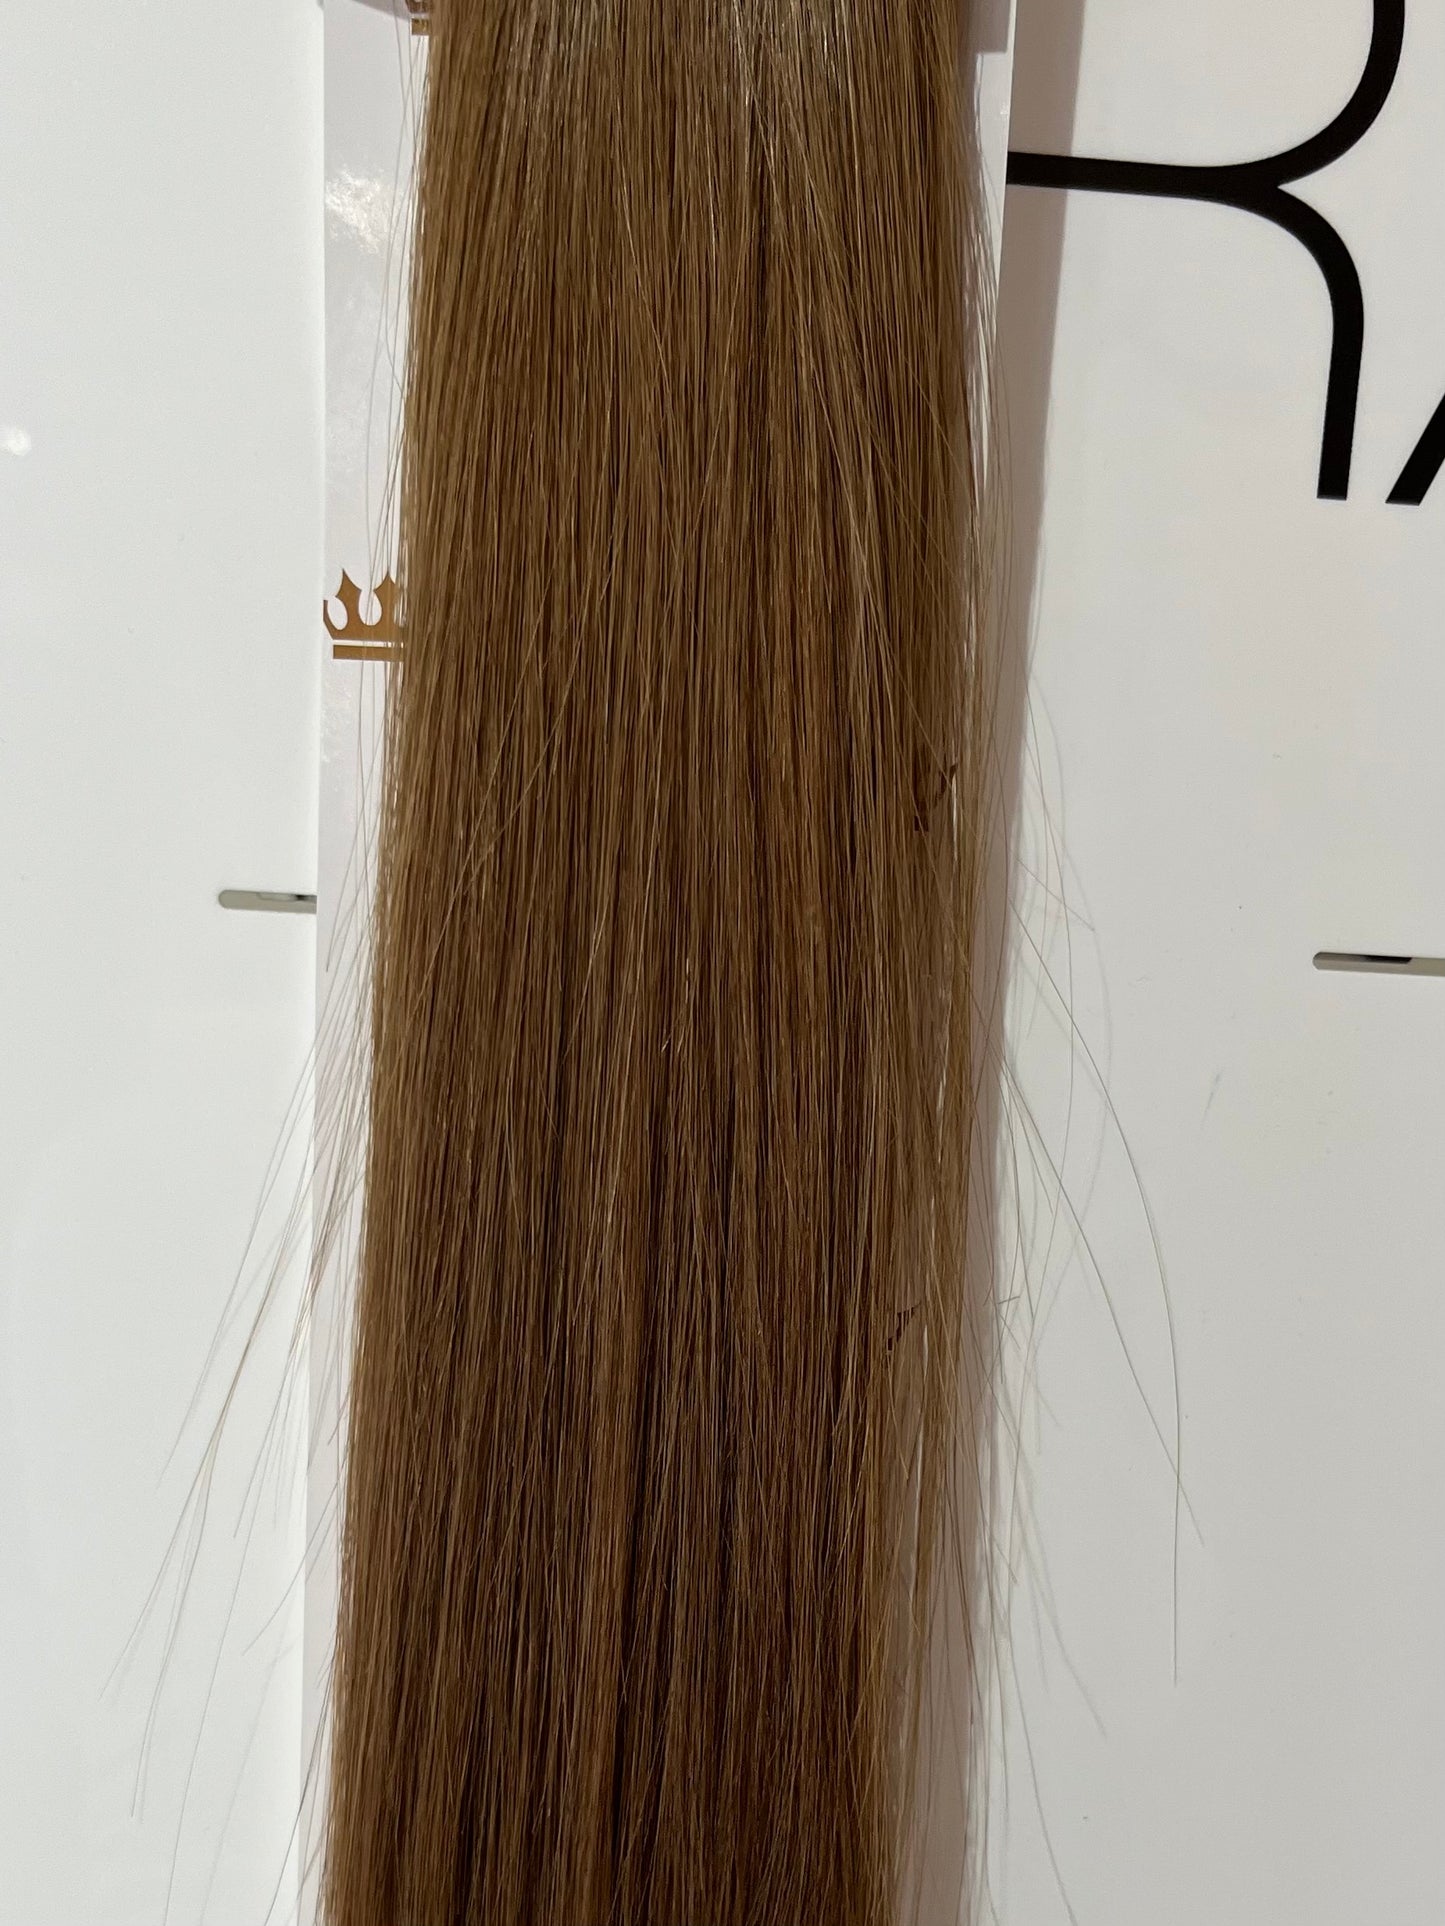 RETAIL CLIP IN EXTENSIONS - LIGHT WARM BROWN